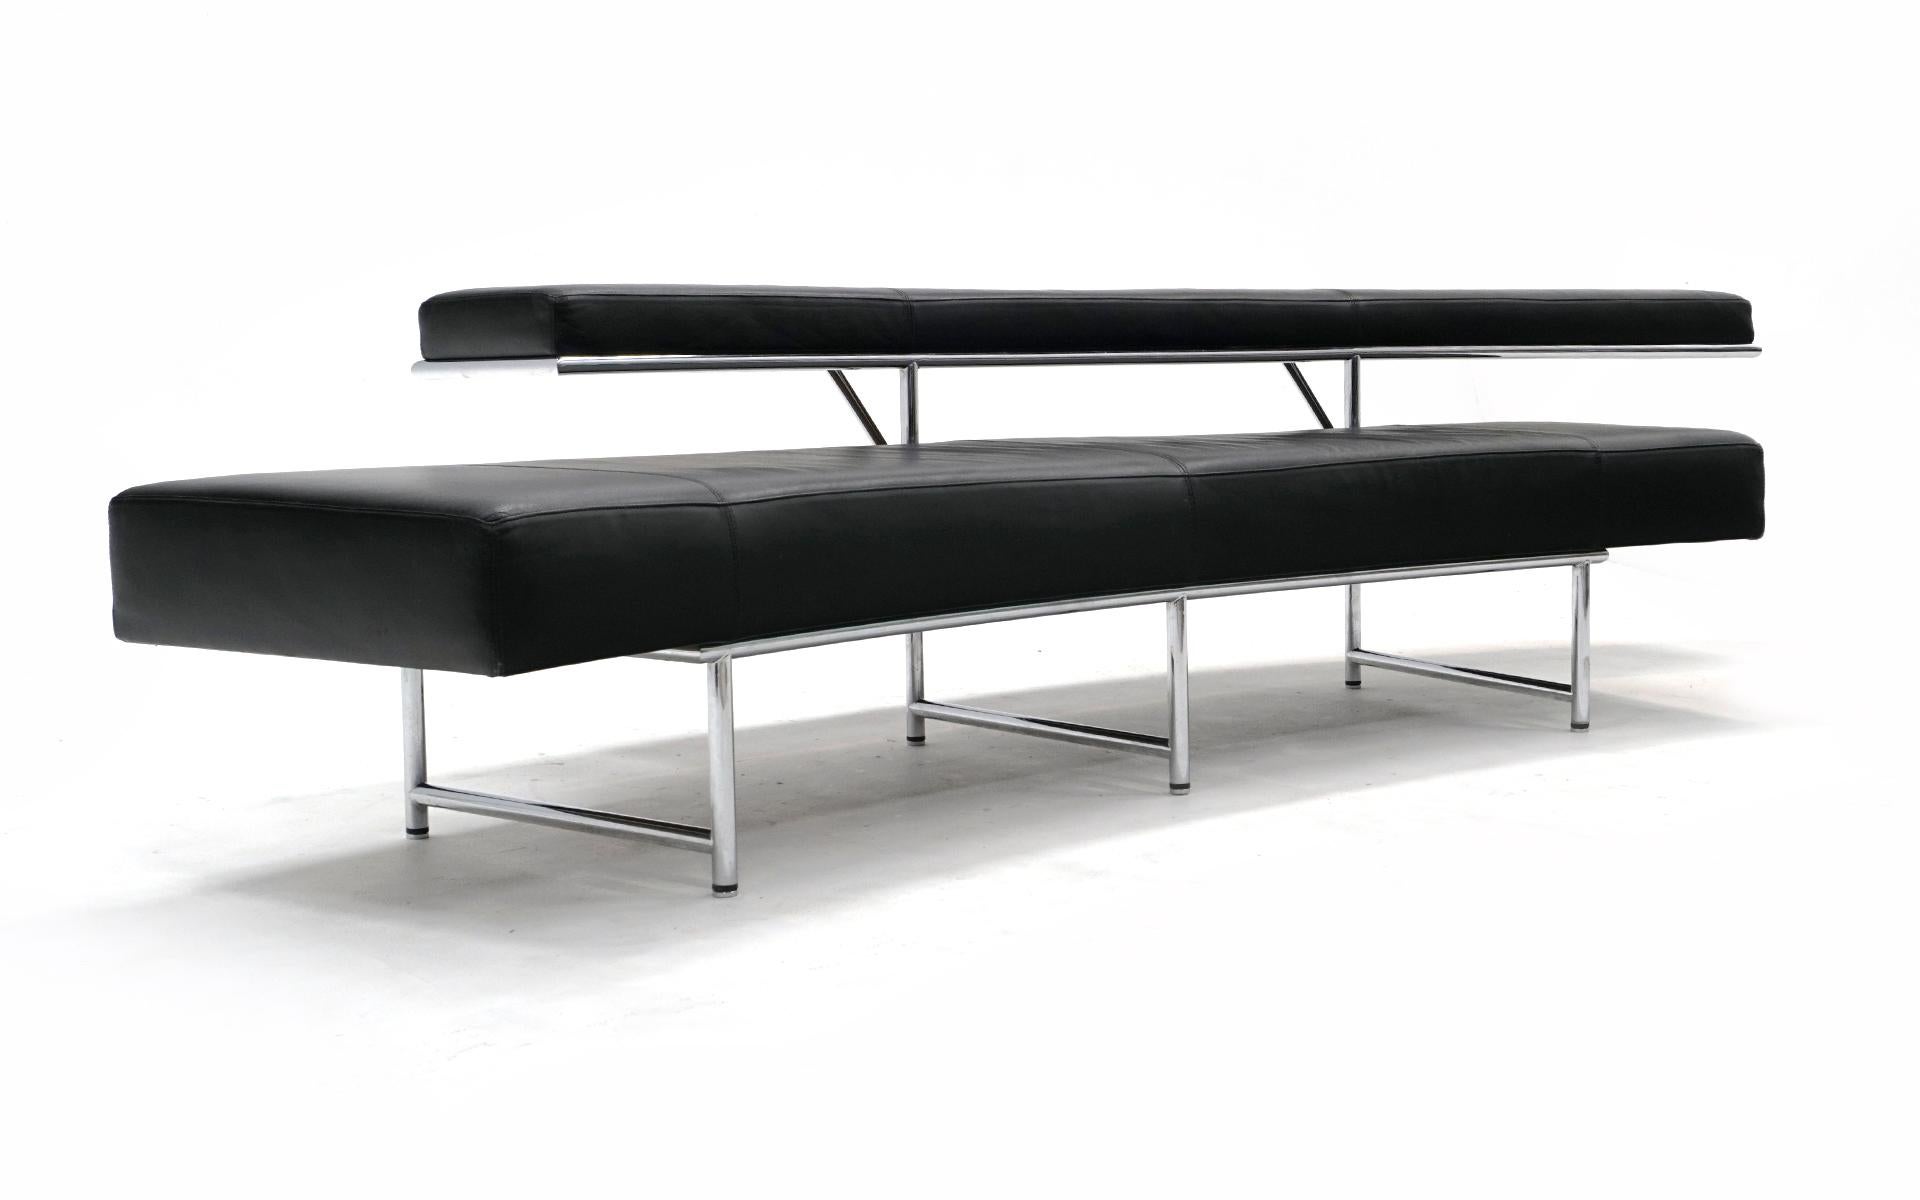 Bauhaus Eileen Gray Monte Carlo Sofa for ClassiCon, Black Leather and Chrome, Signed For Sale